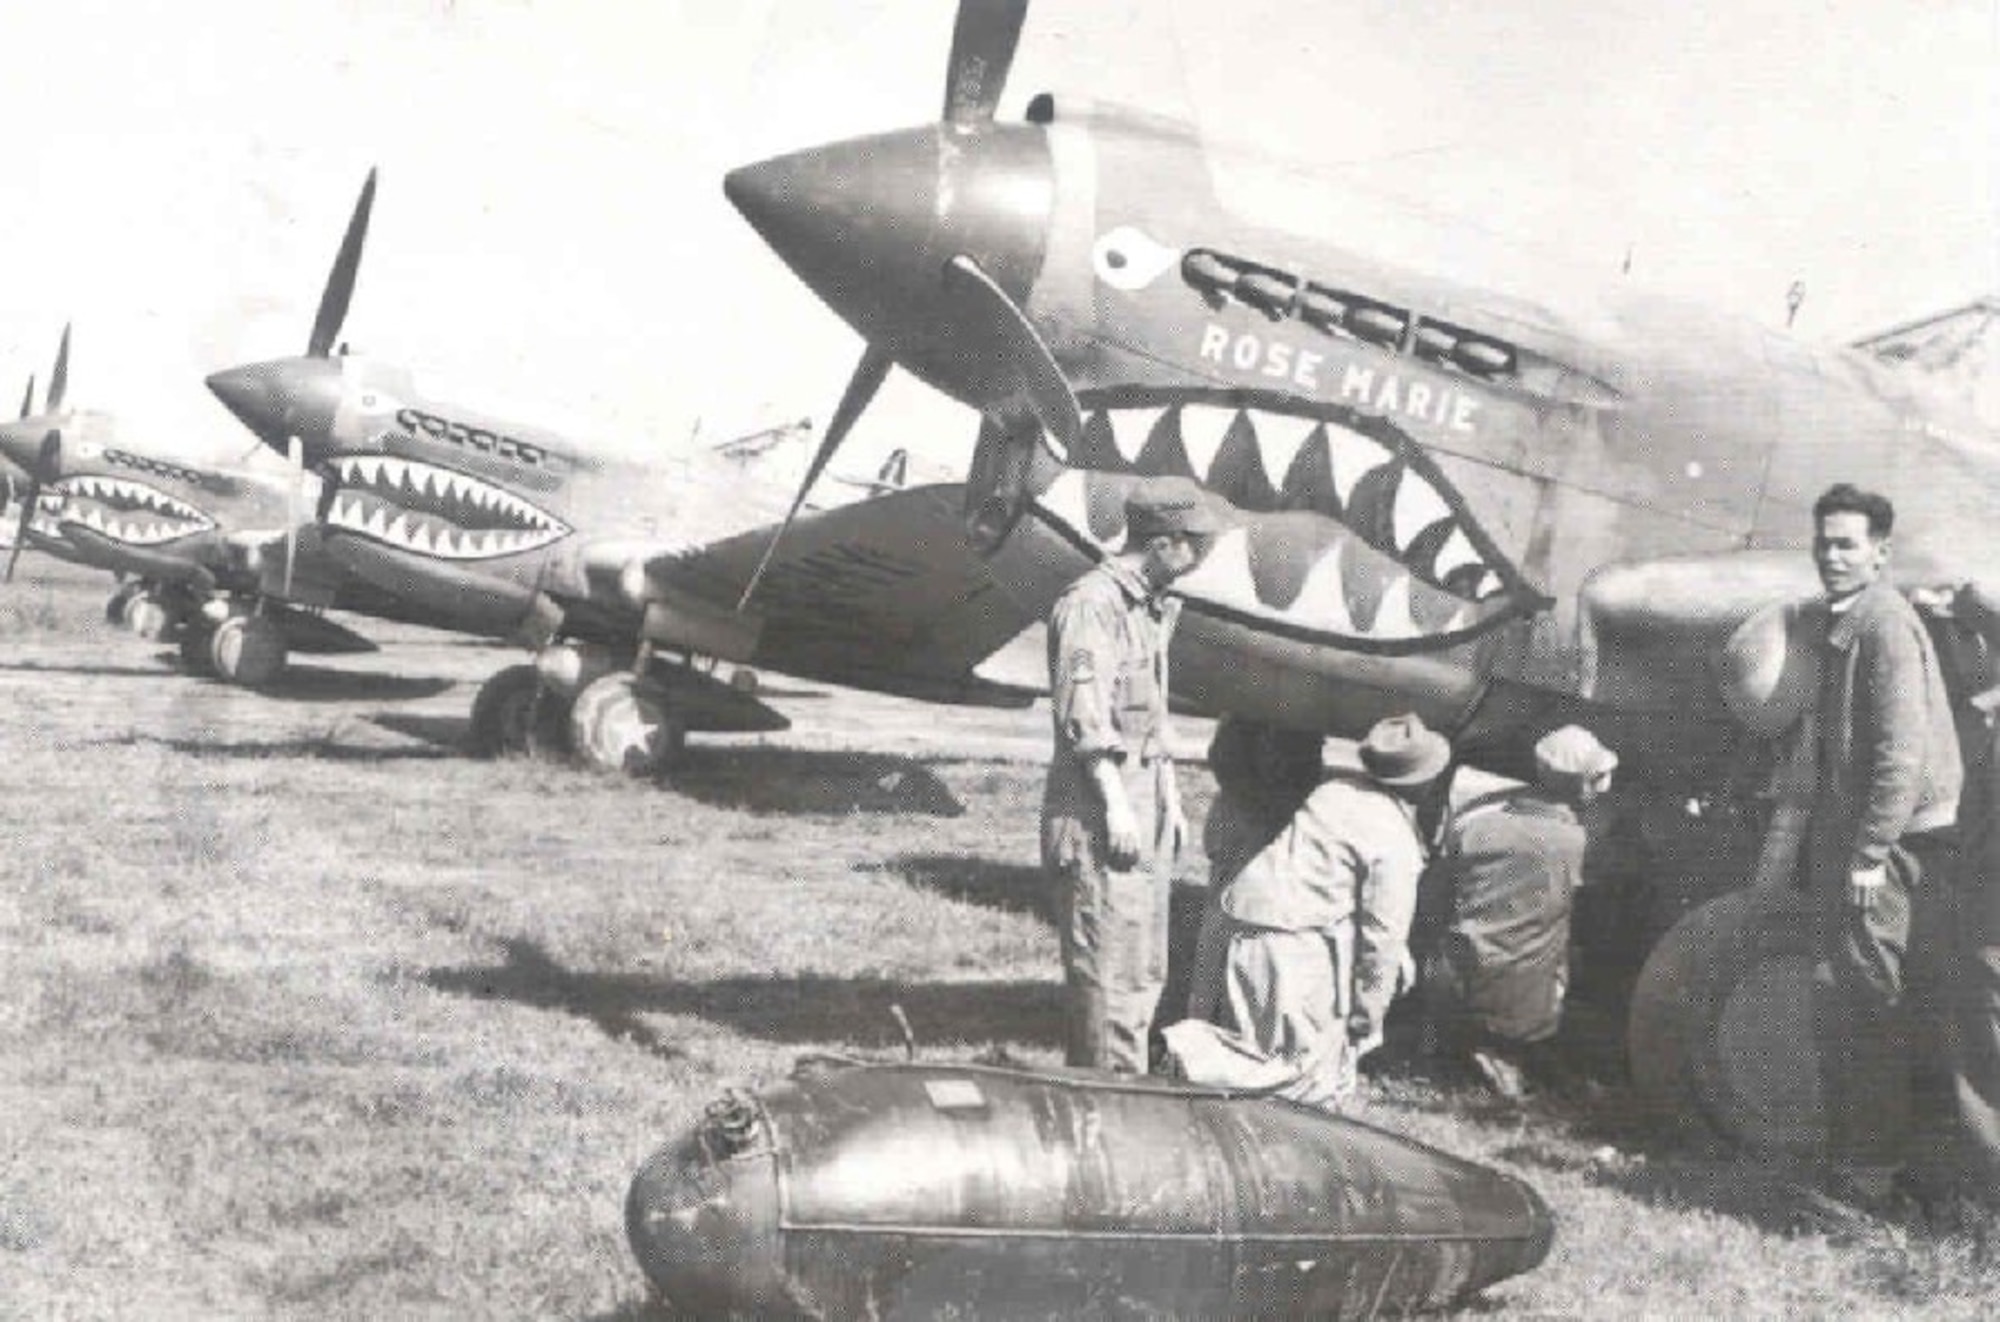 P-40 aircraft on the line during World War II.